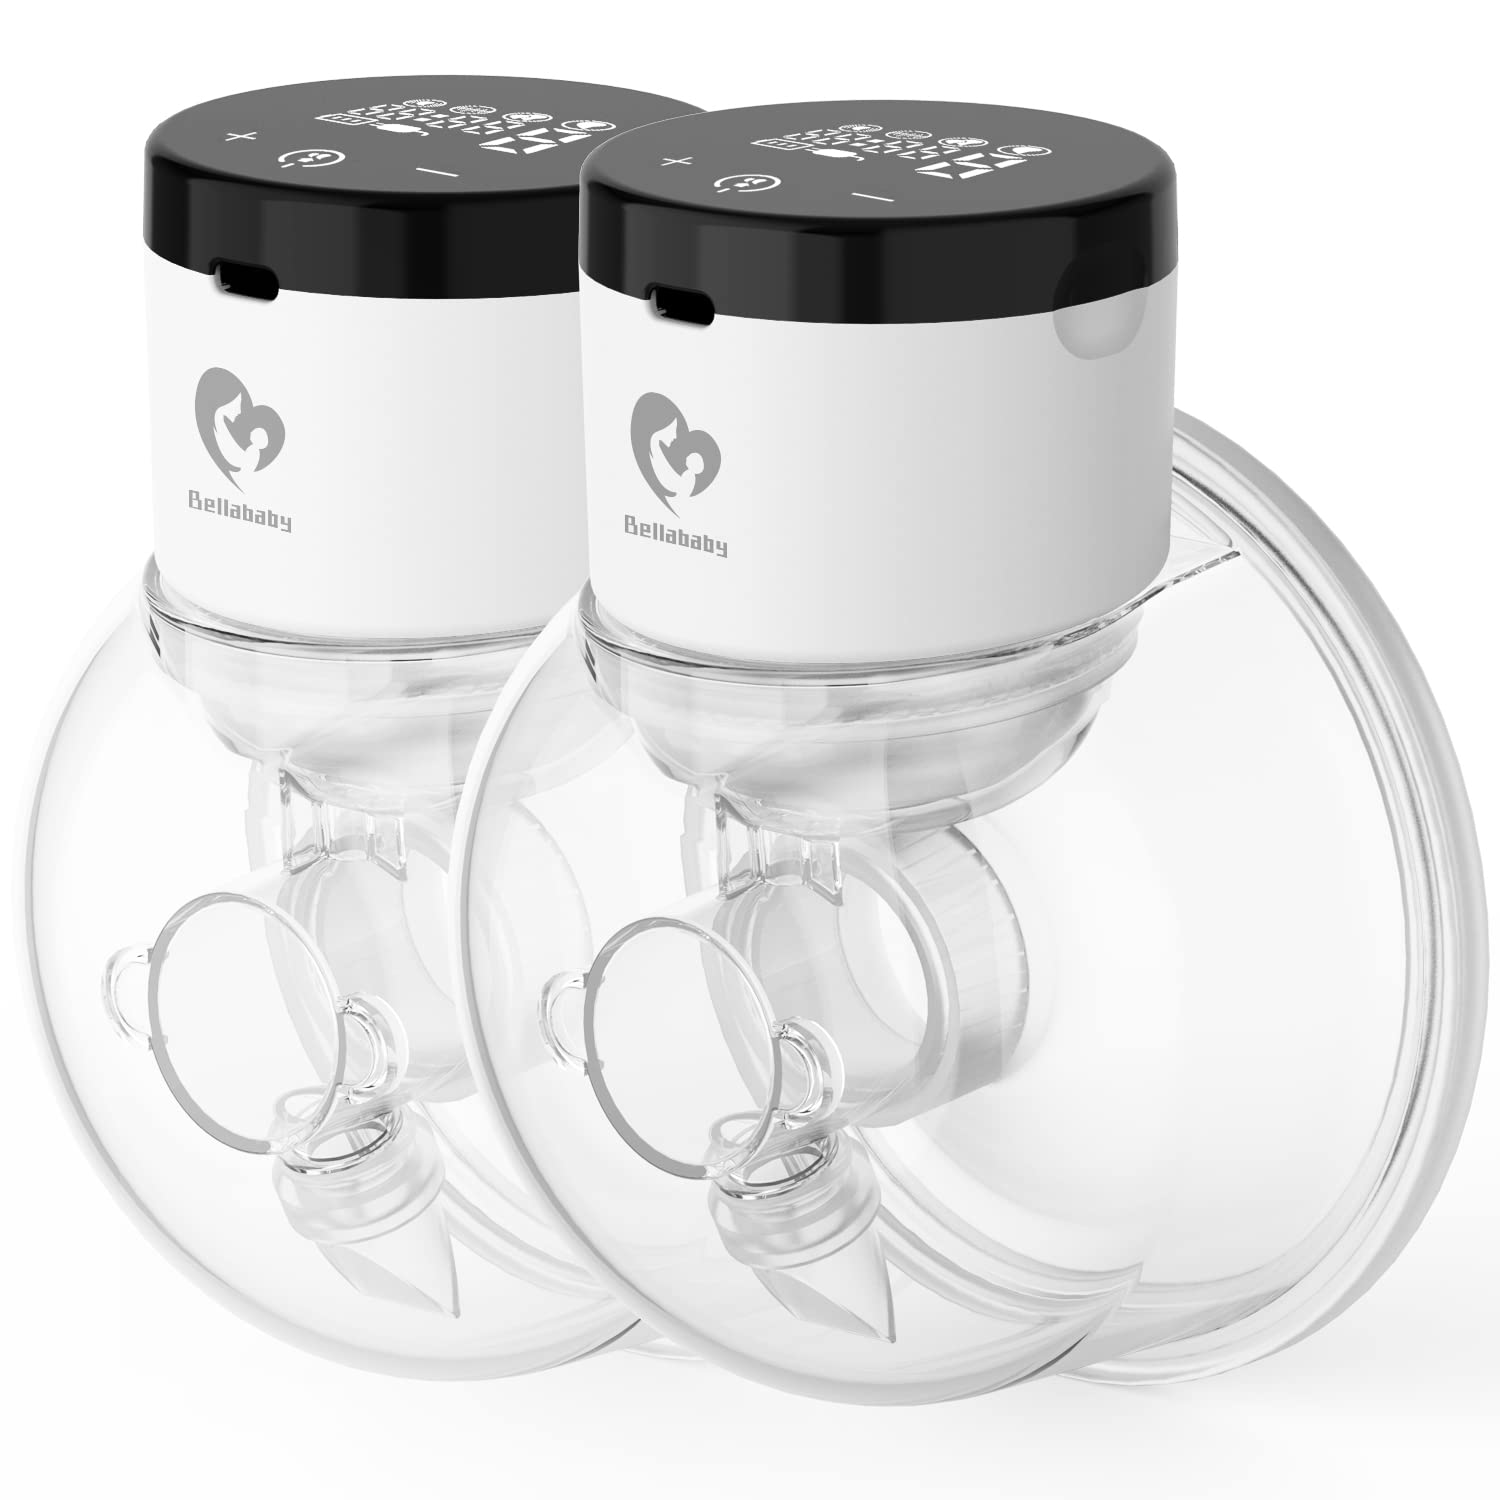 [Spectra] Dual Compact Portable Electric Breast Pump Dual Breast Pump  ⭐Tracking⭐ 